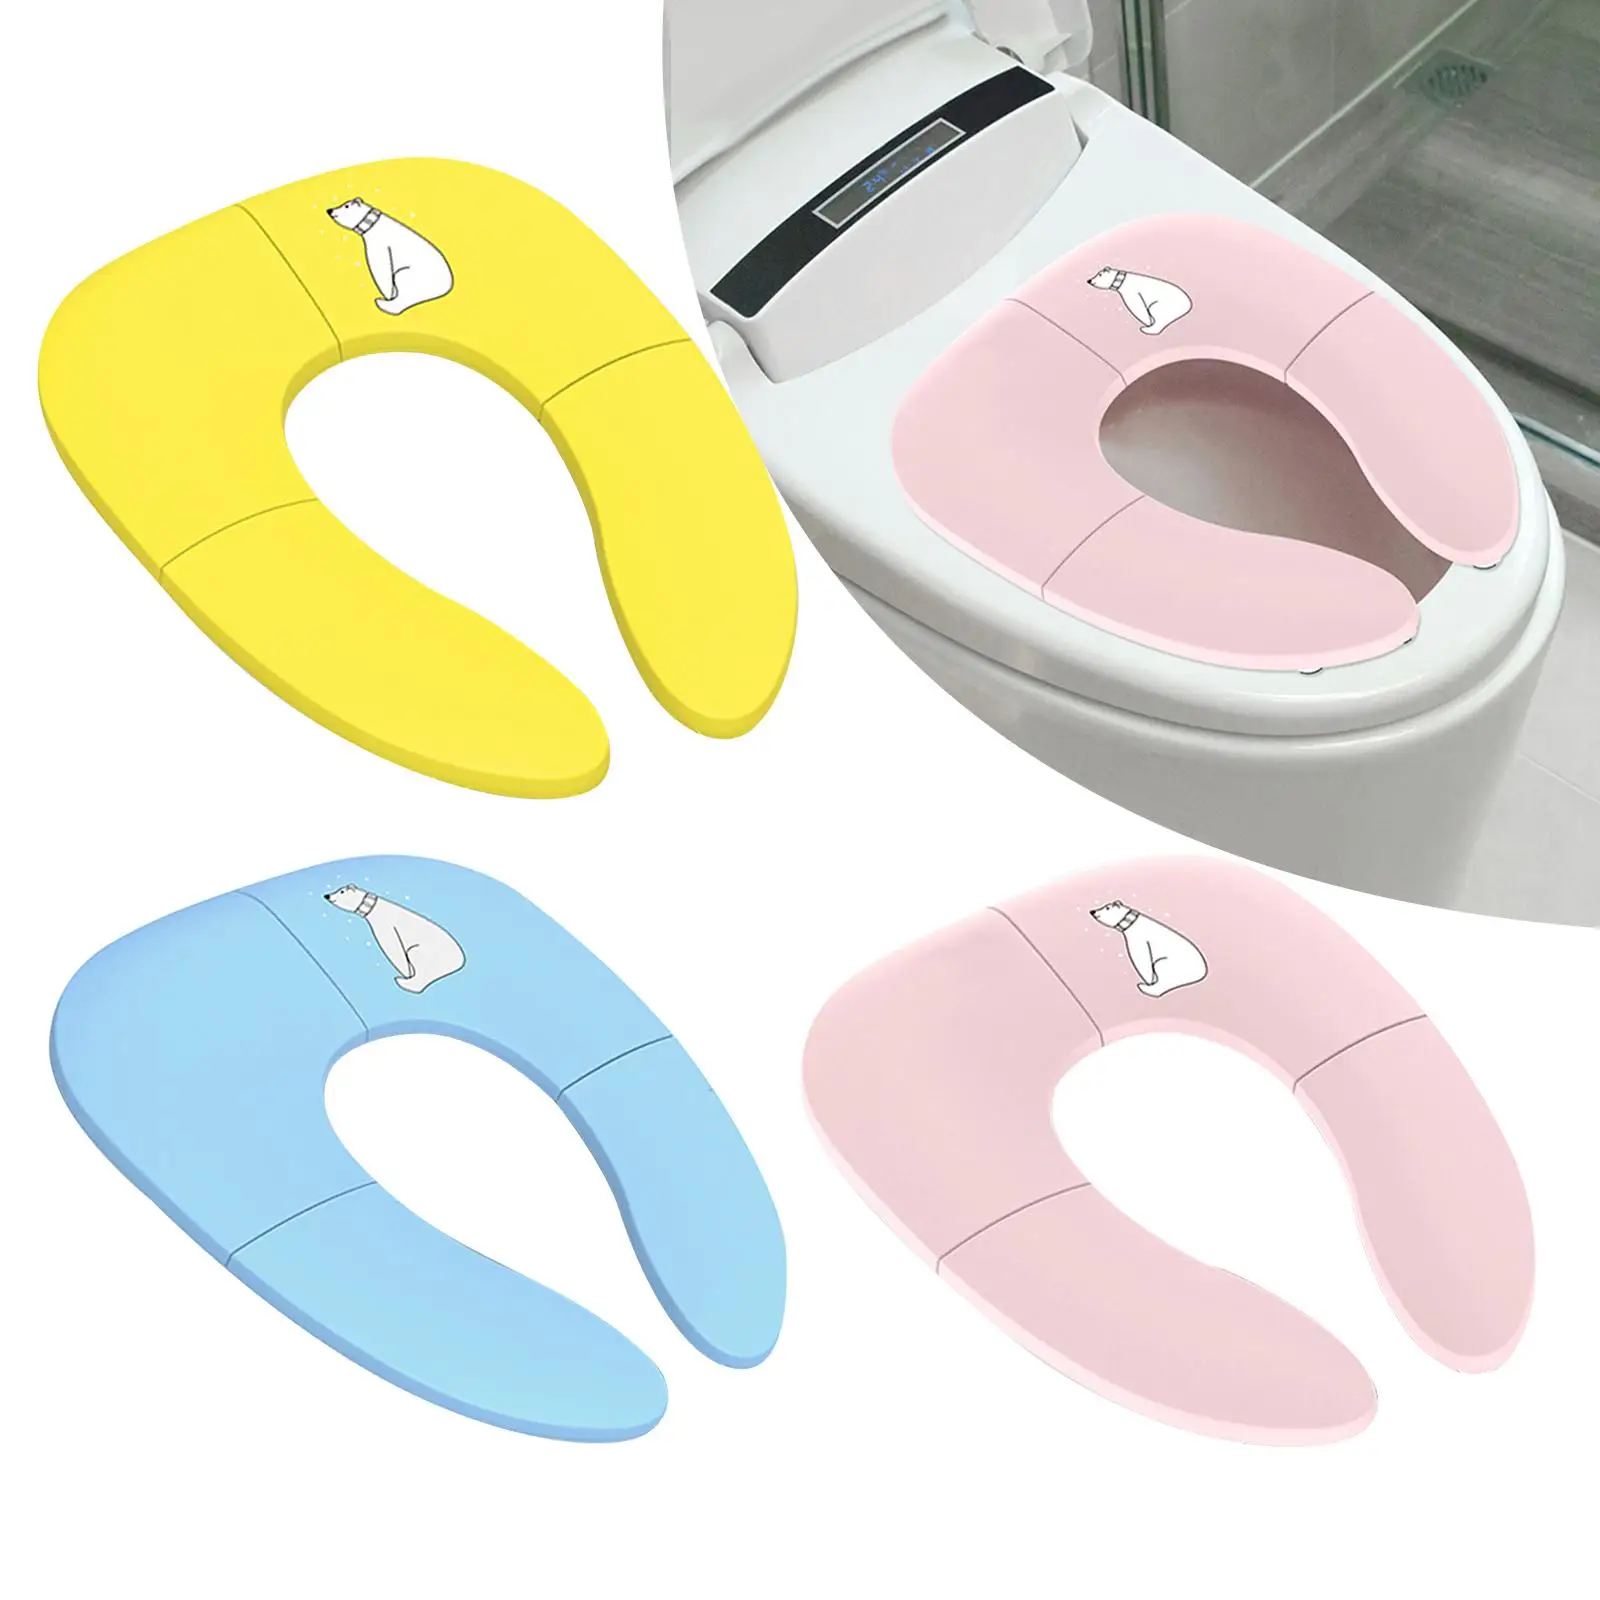 Folding Toilet Cover Improved  Seat Non- Toilet Seat Toilet Pad for Round And Round Toilets